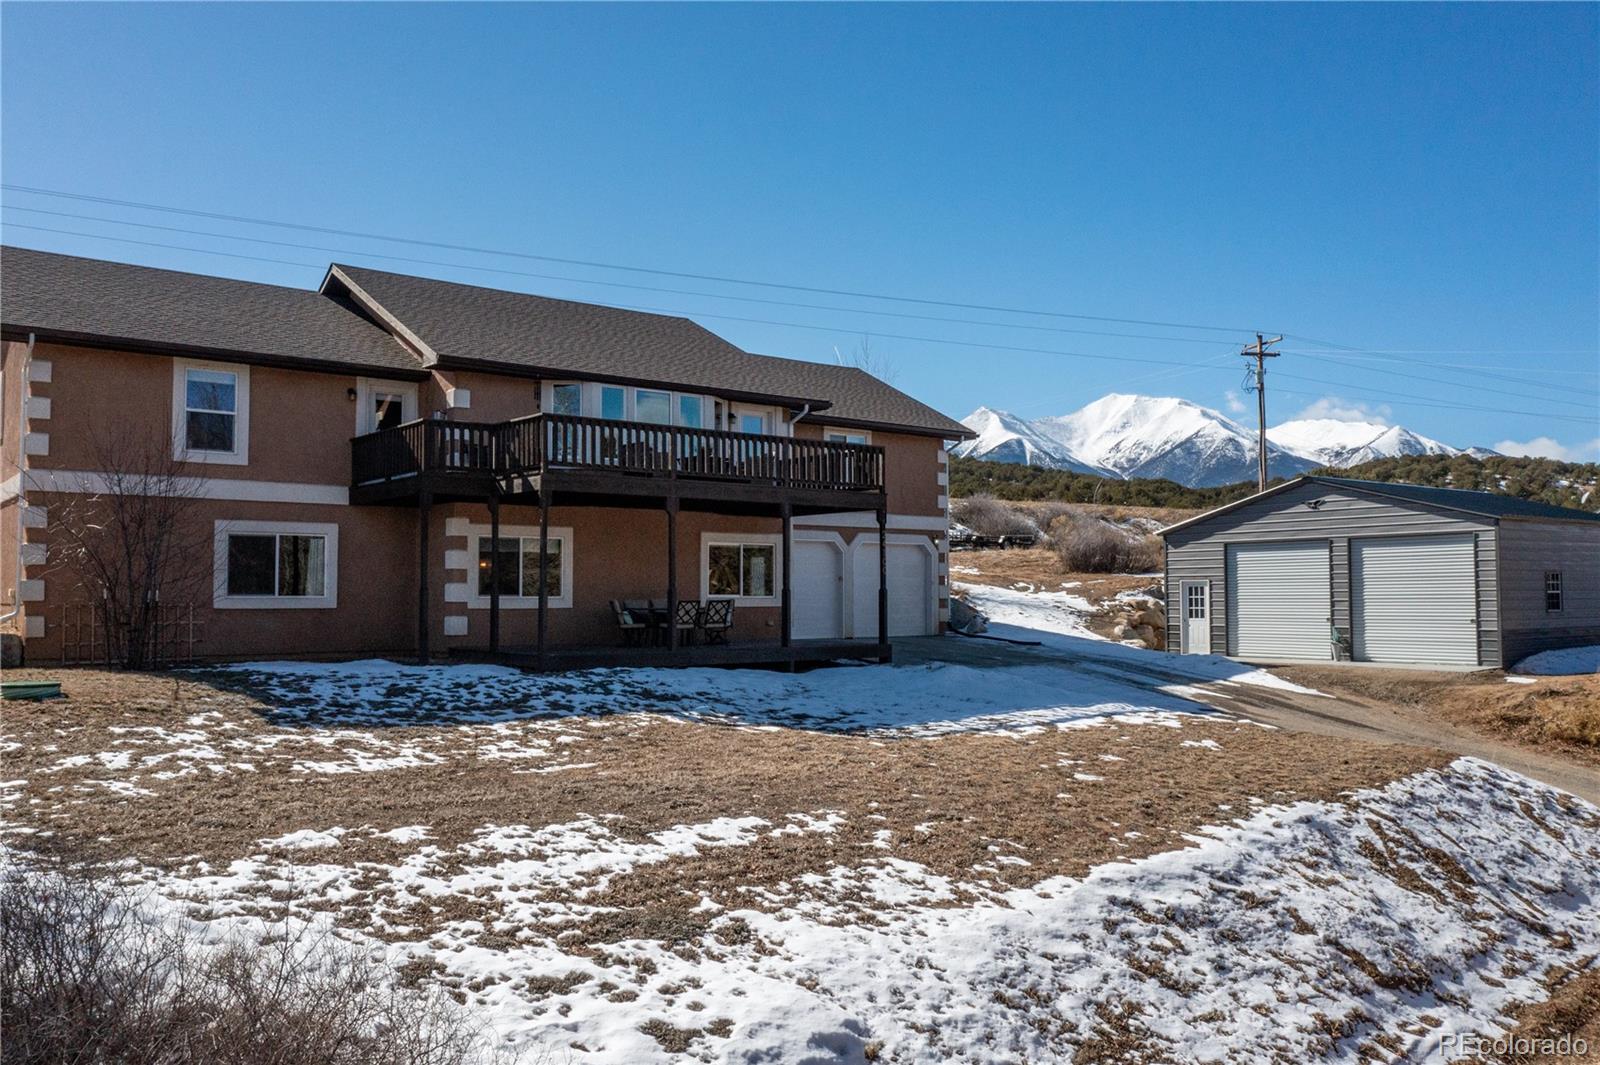 24100  county road 301 a , Buena Vista sold home. Closed on 2024-04-29 for $755,000.